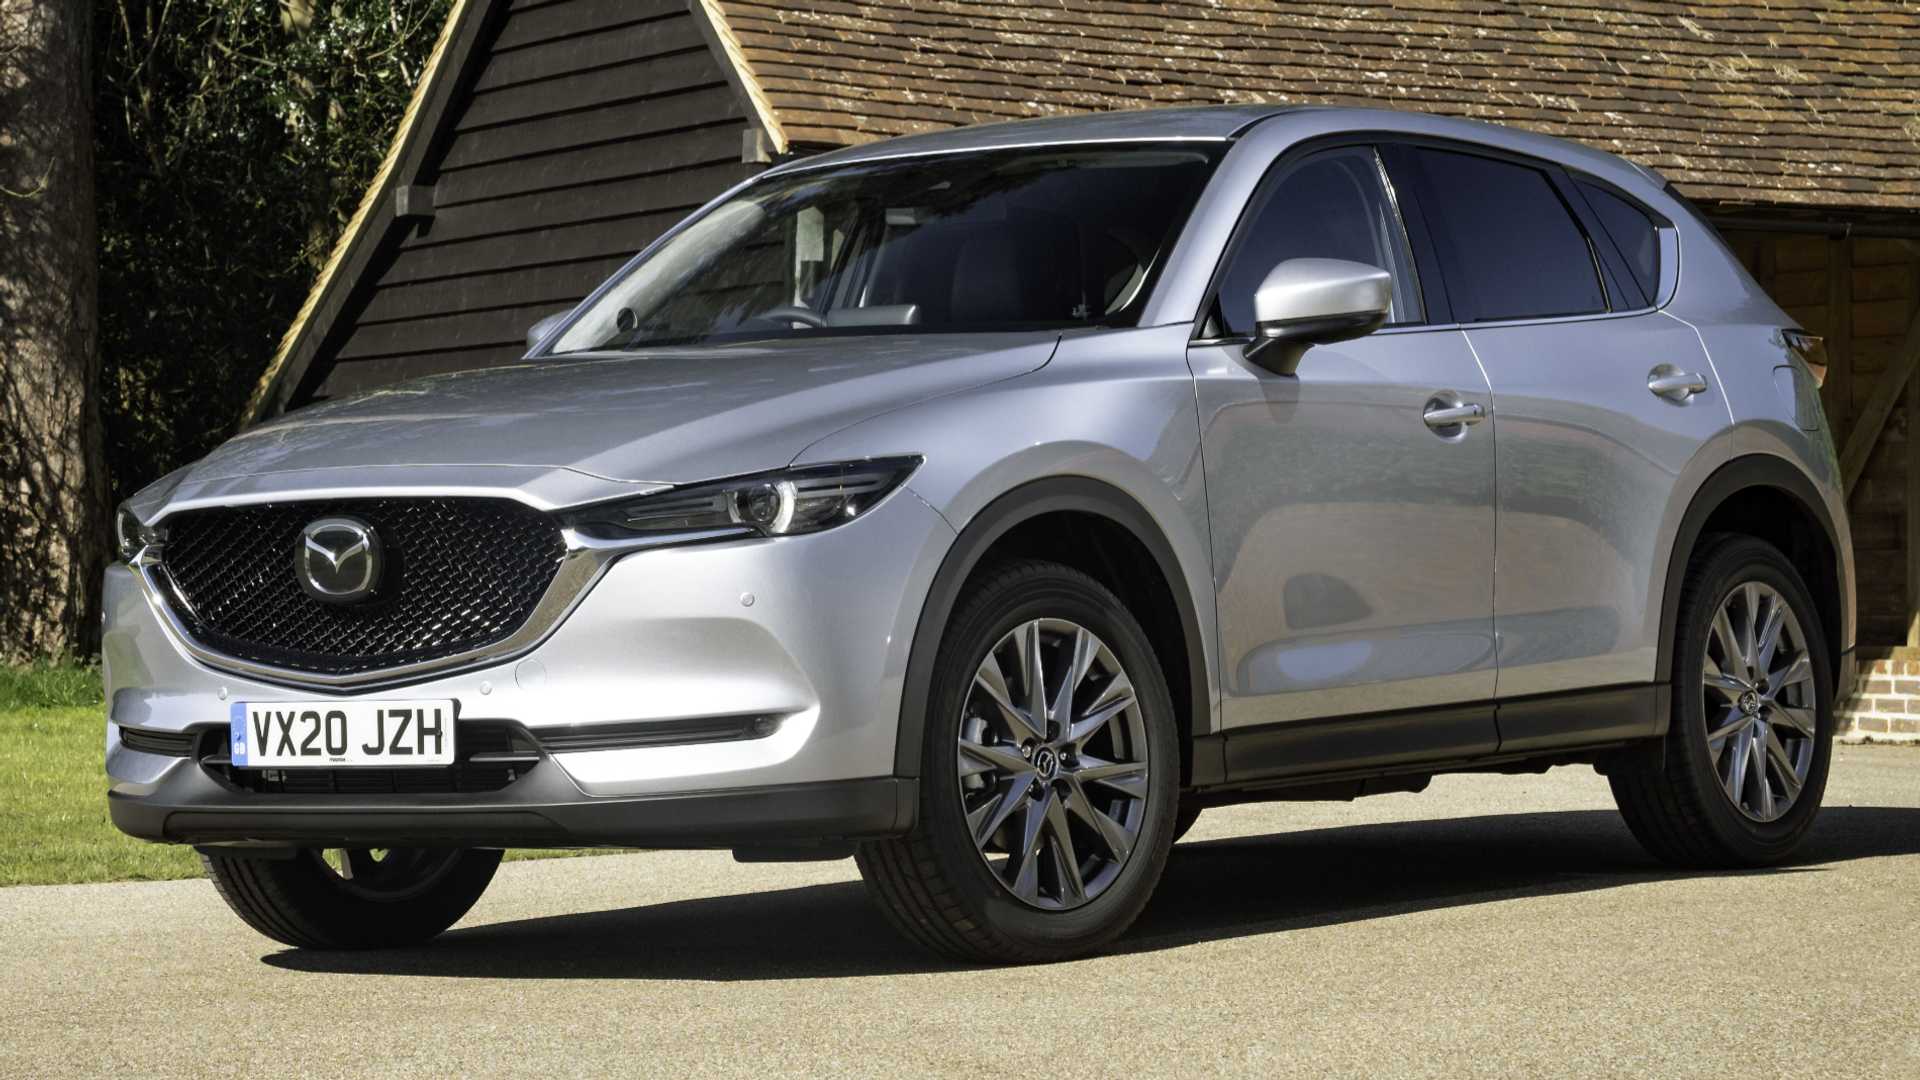 9 - The Least Reliable Cars You Can Buy - Mazda CX 5